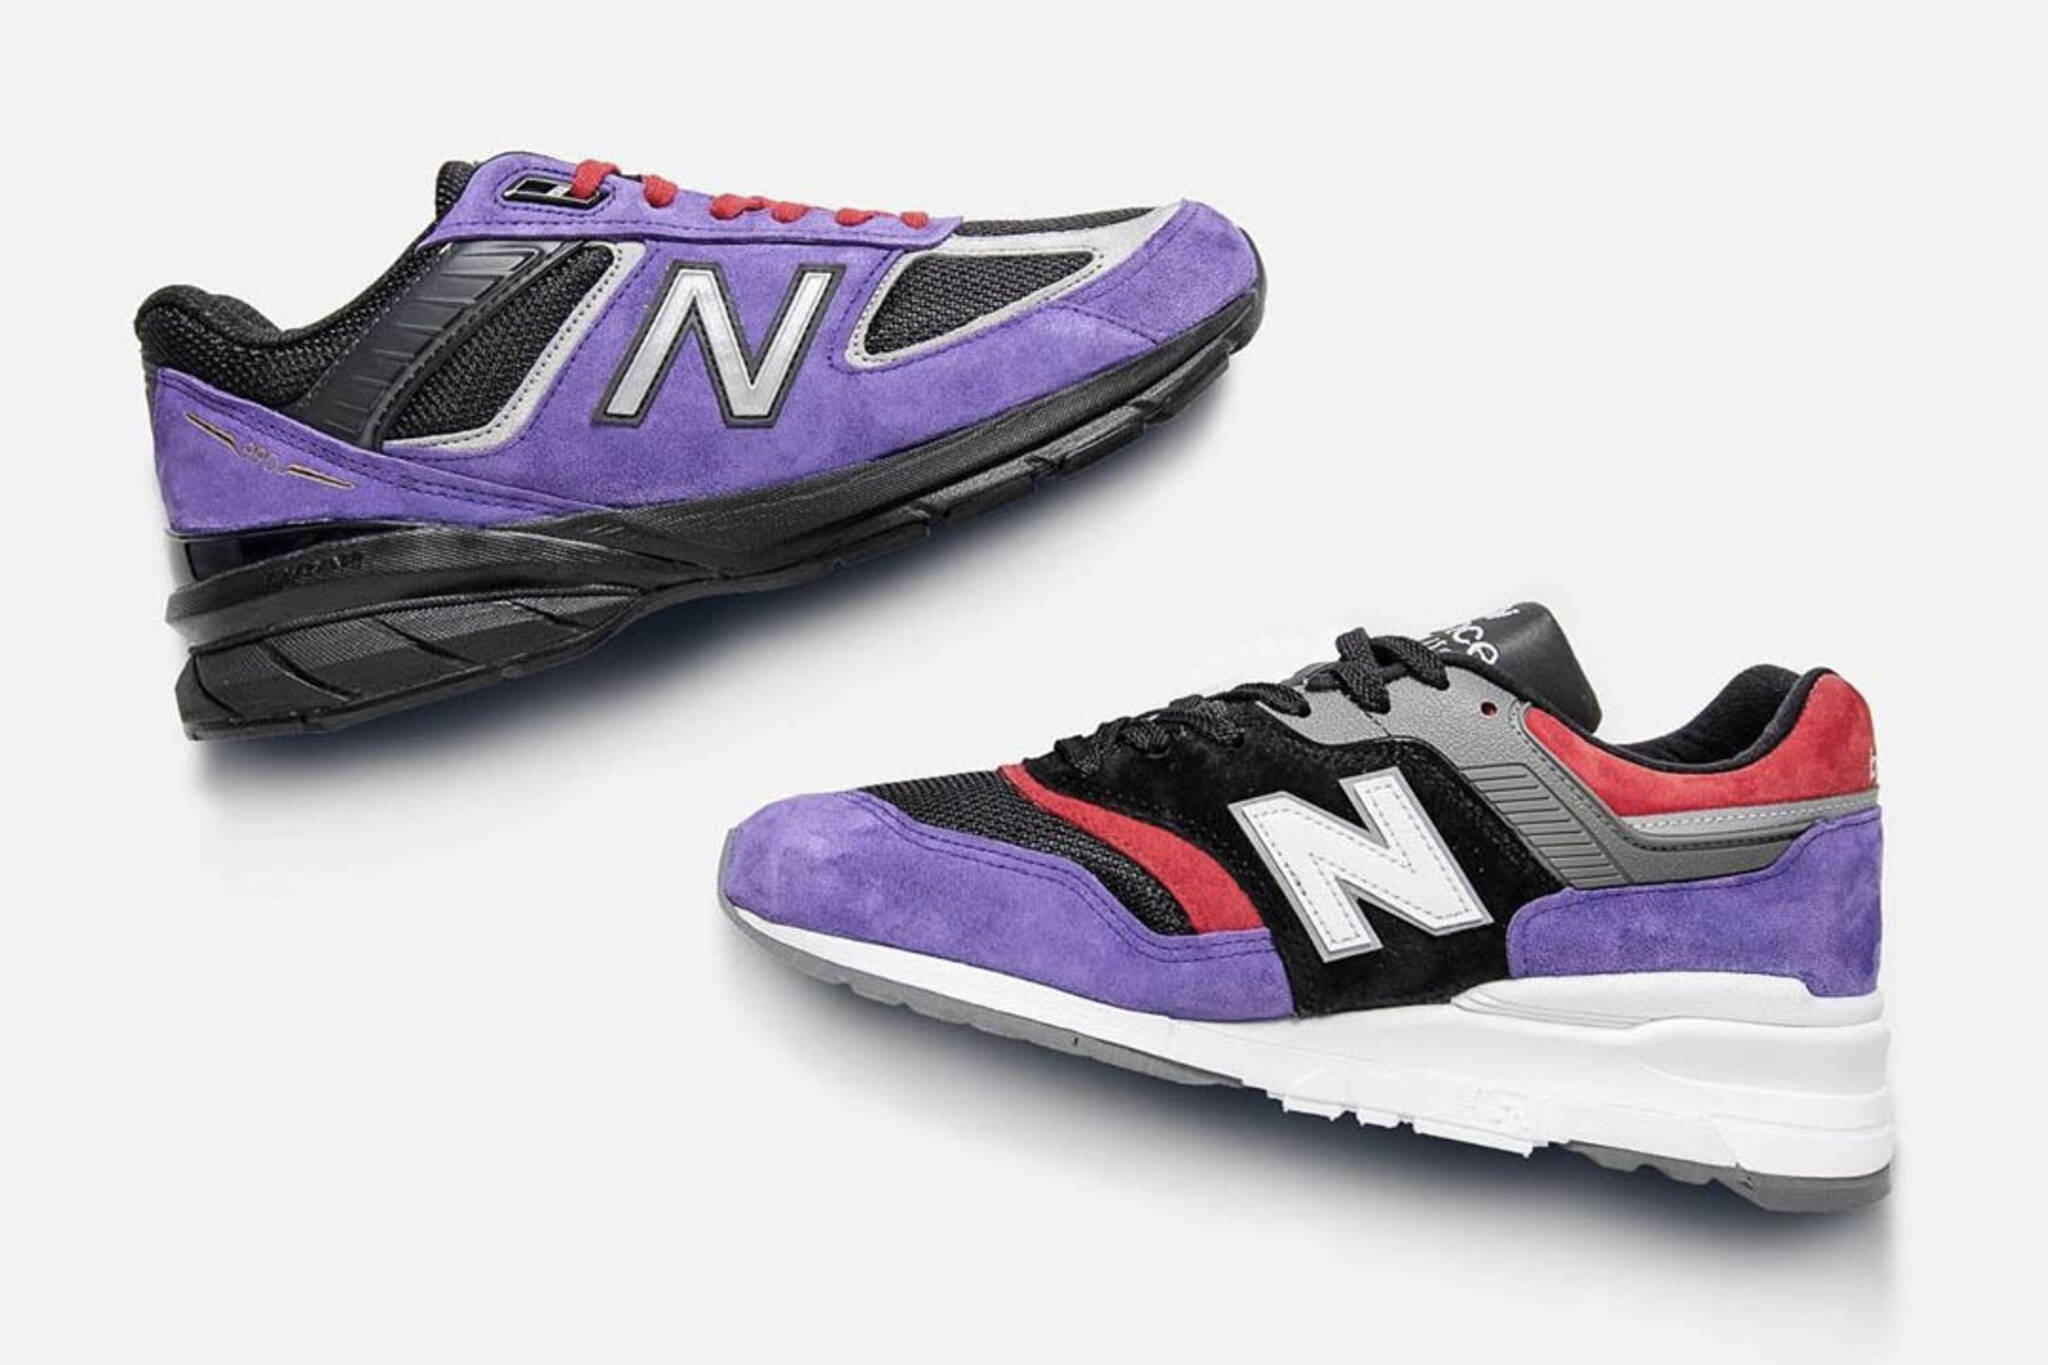 New Balance releases special edition championship sneakers